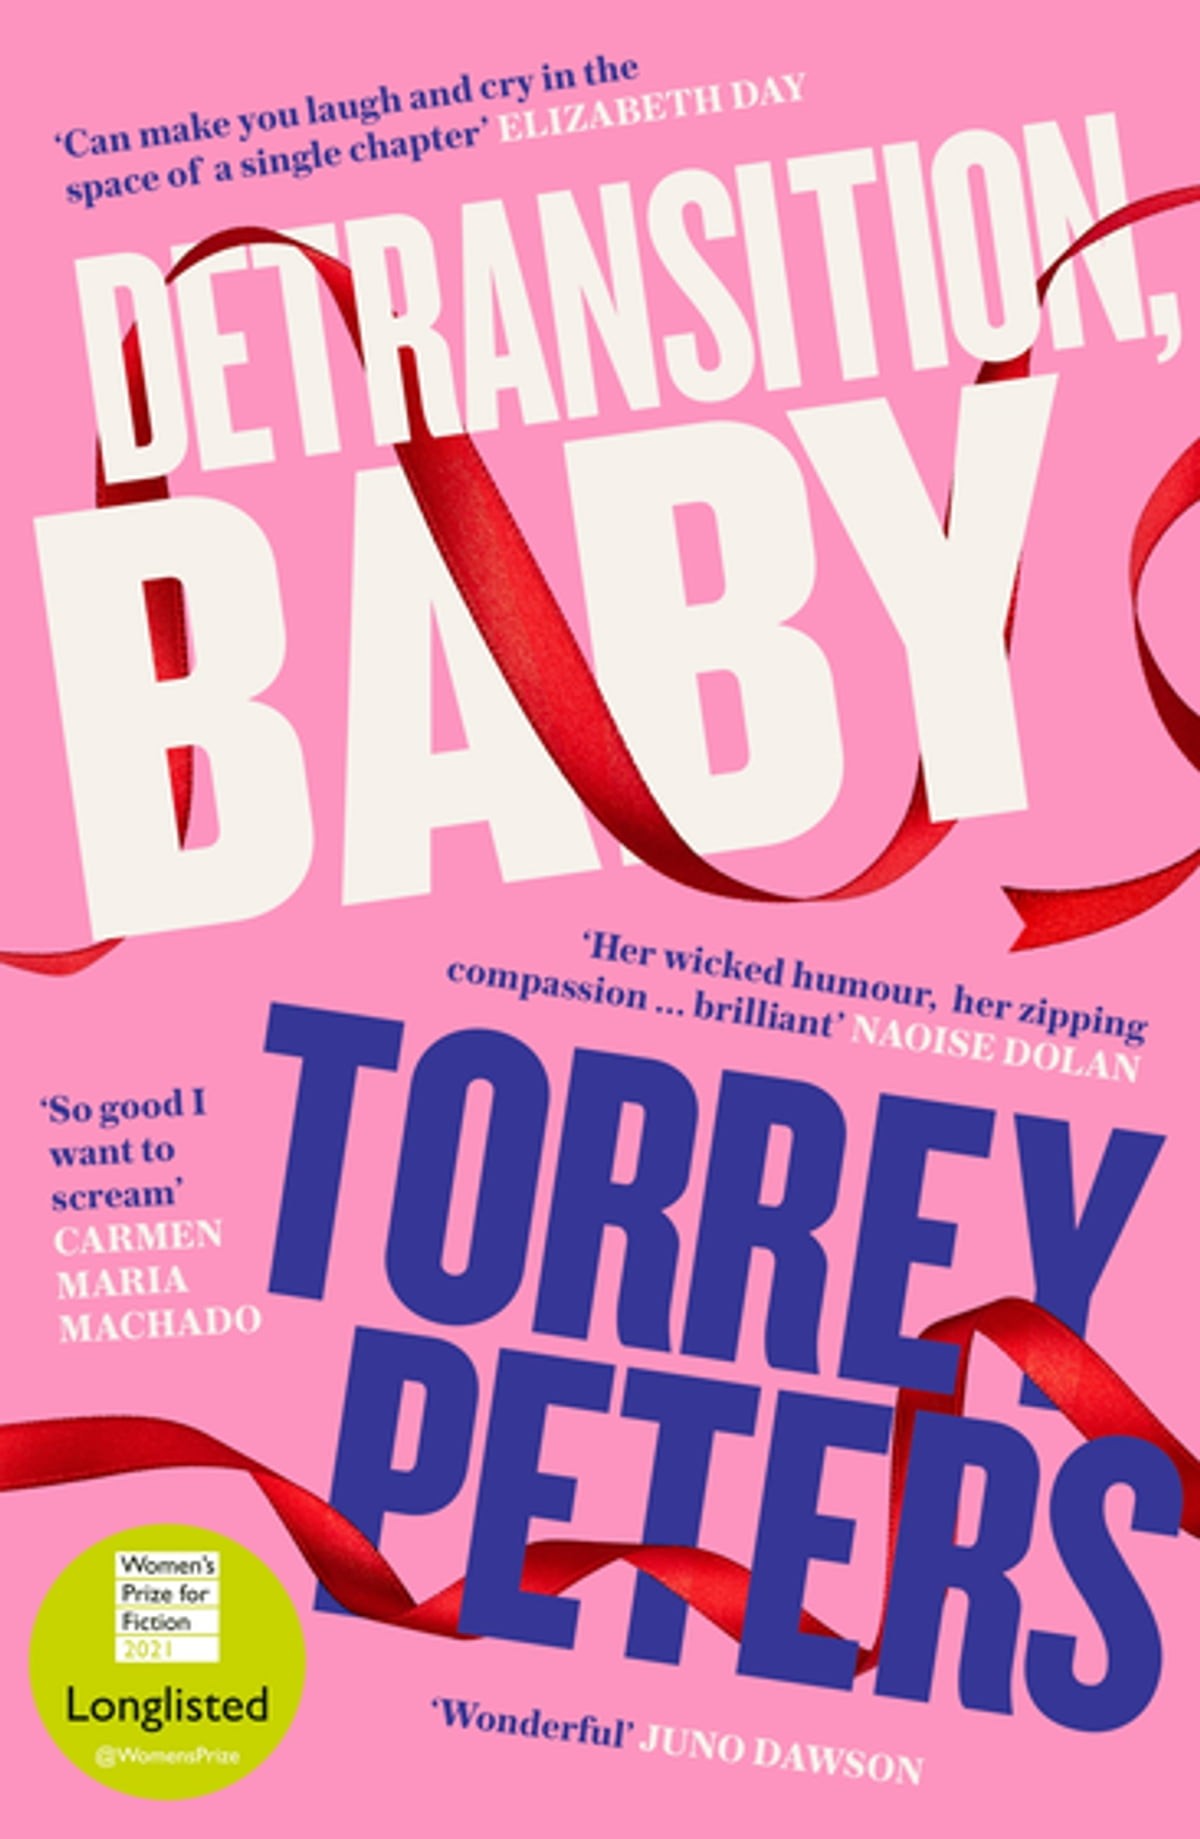 Story Opening: Detransition, Baby by Torrey Peters